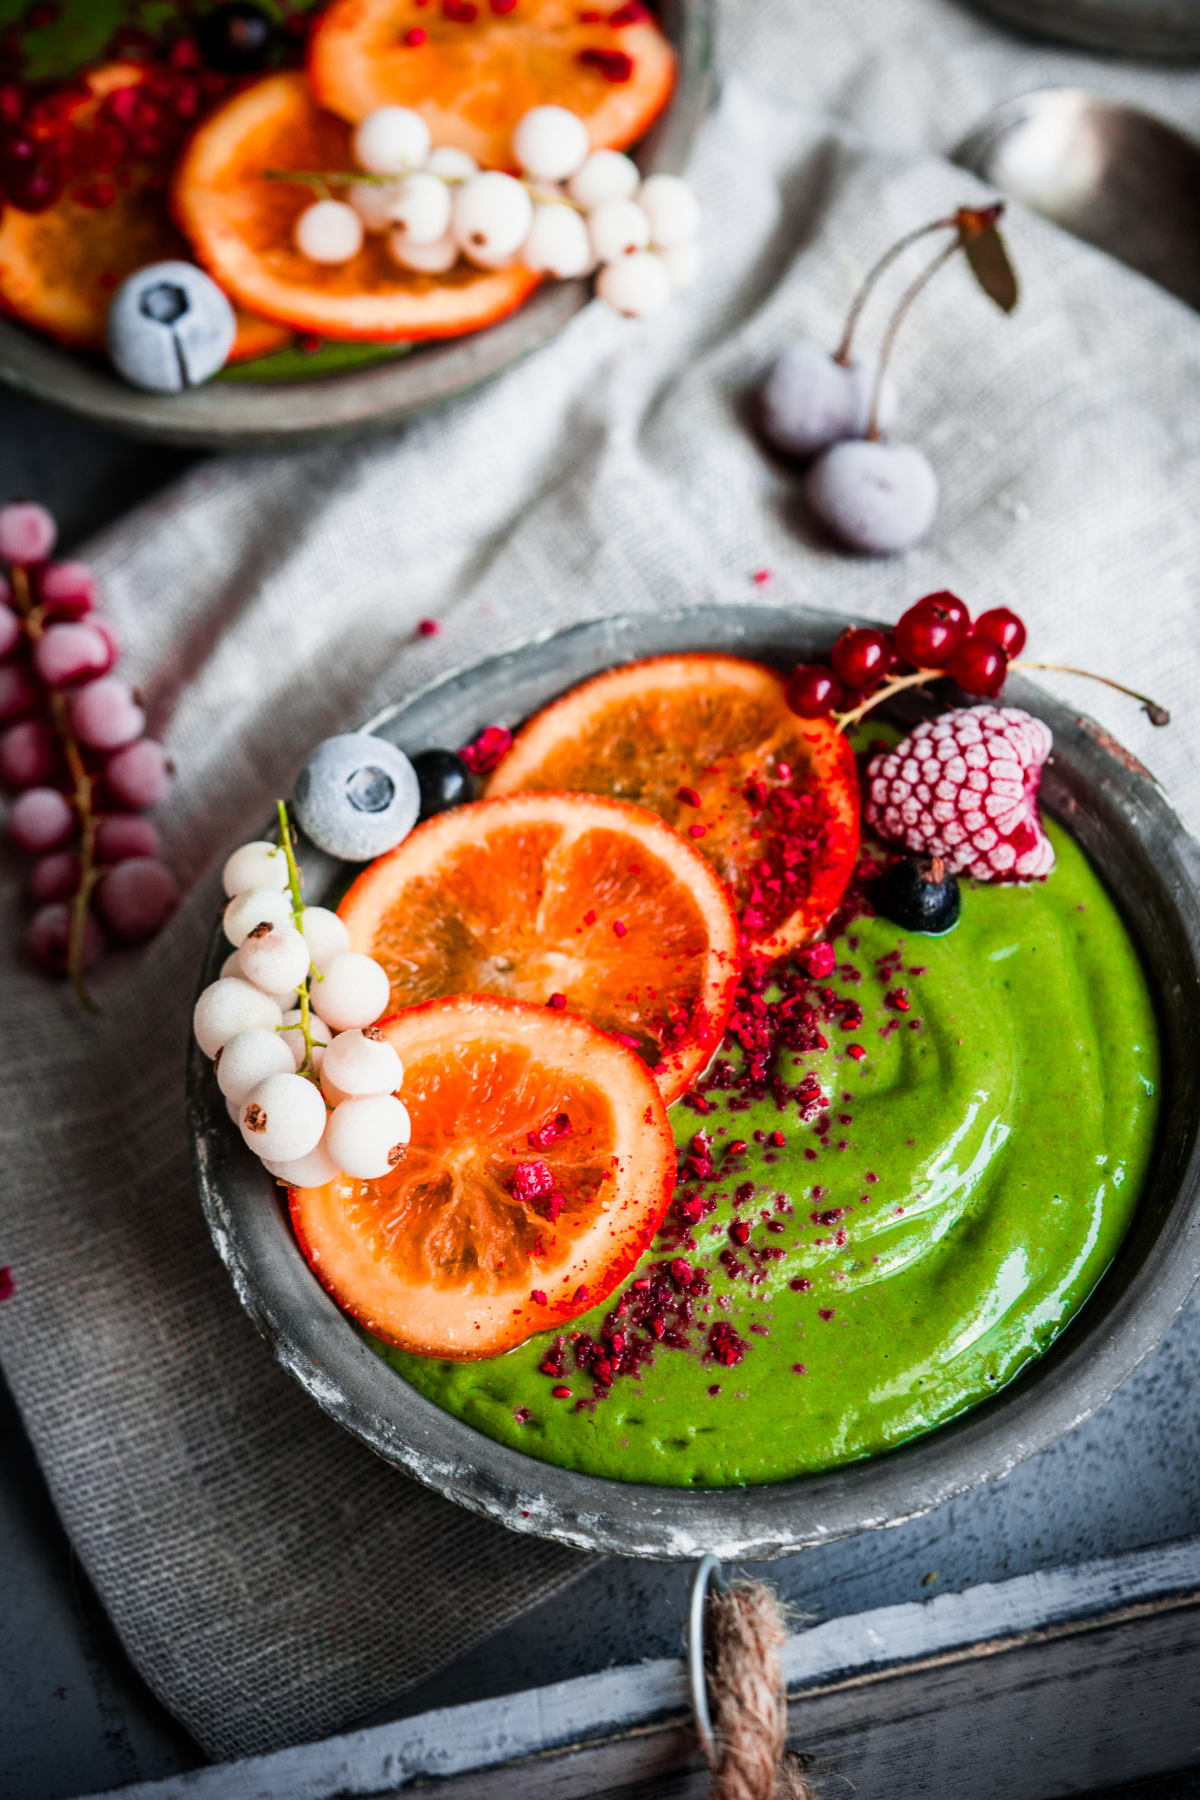 Green smoothie bowl with fruits on it